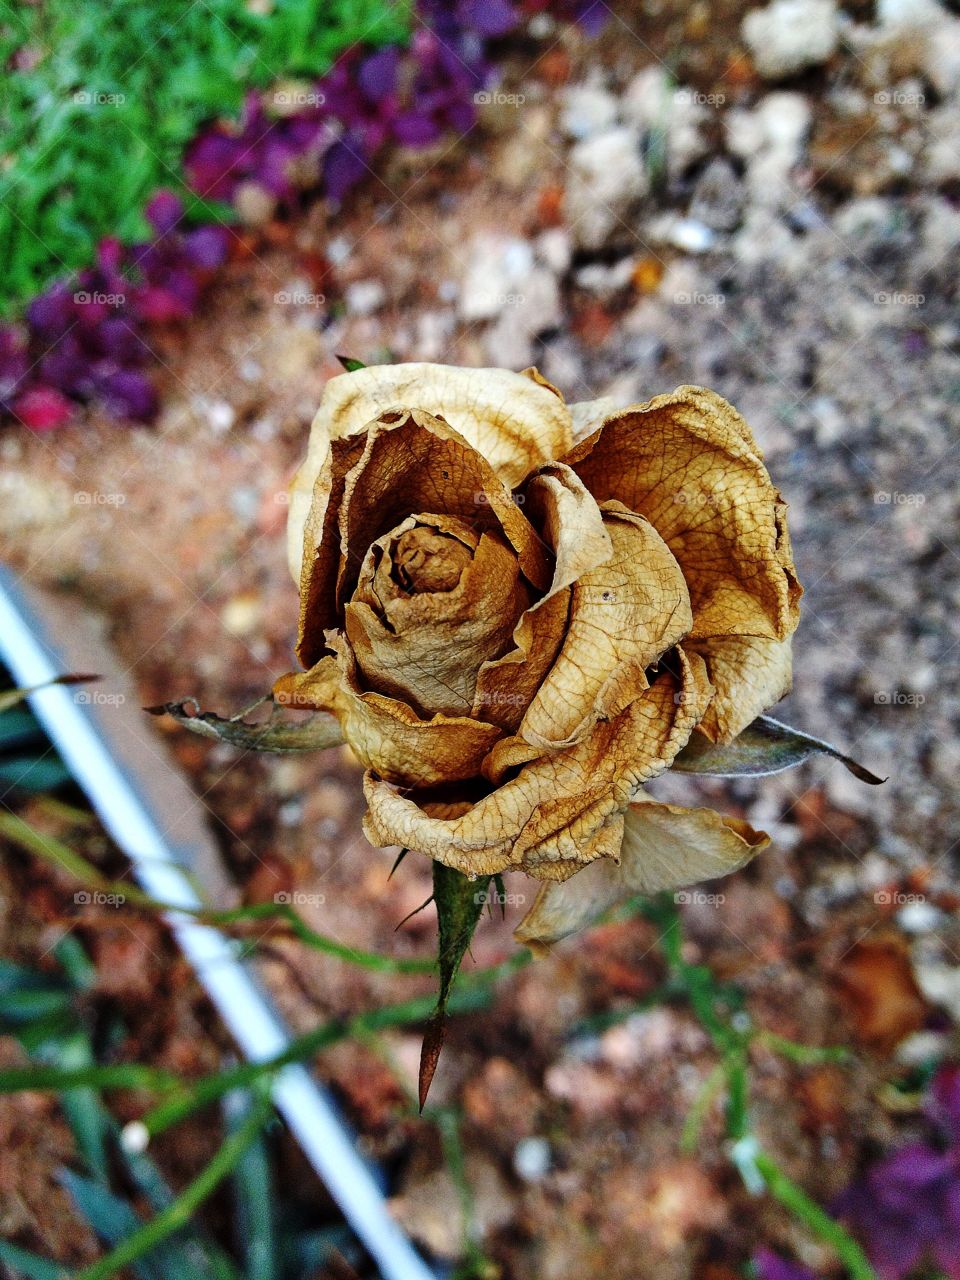 Withered rose . A poetic symbol of love and death